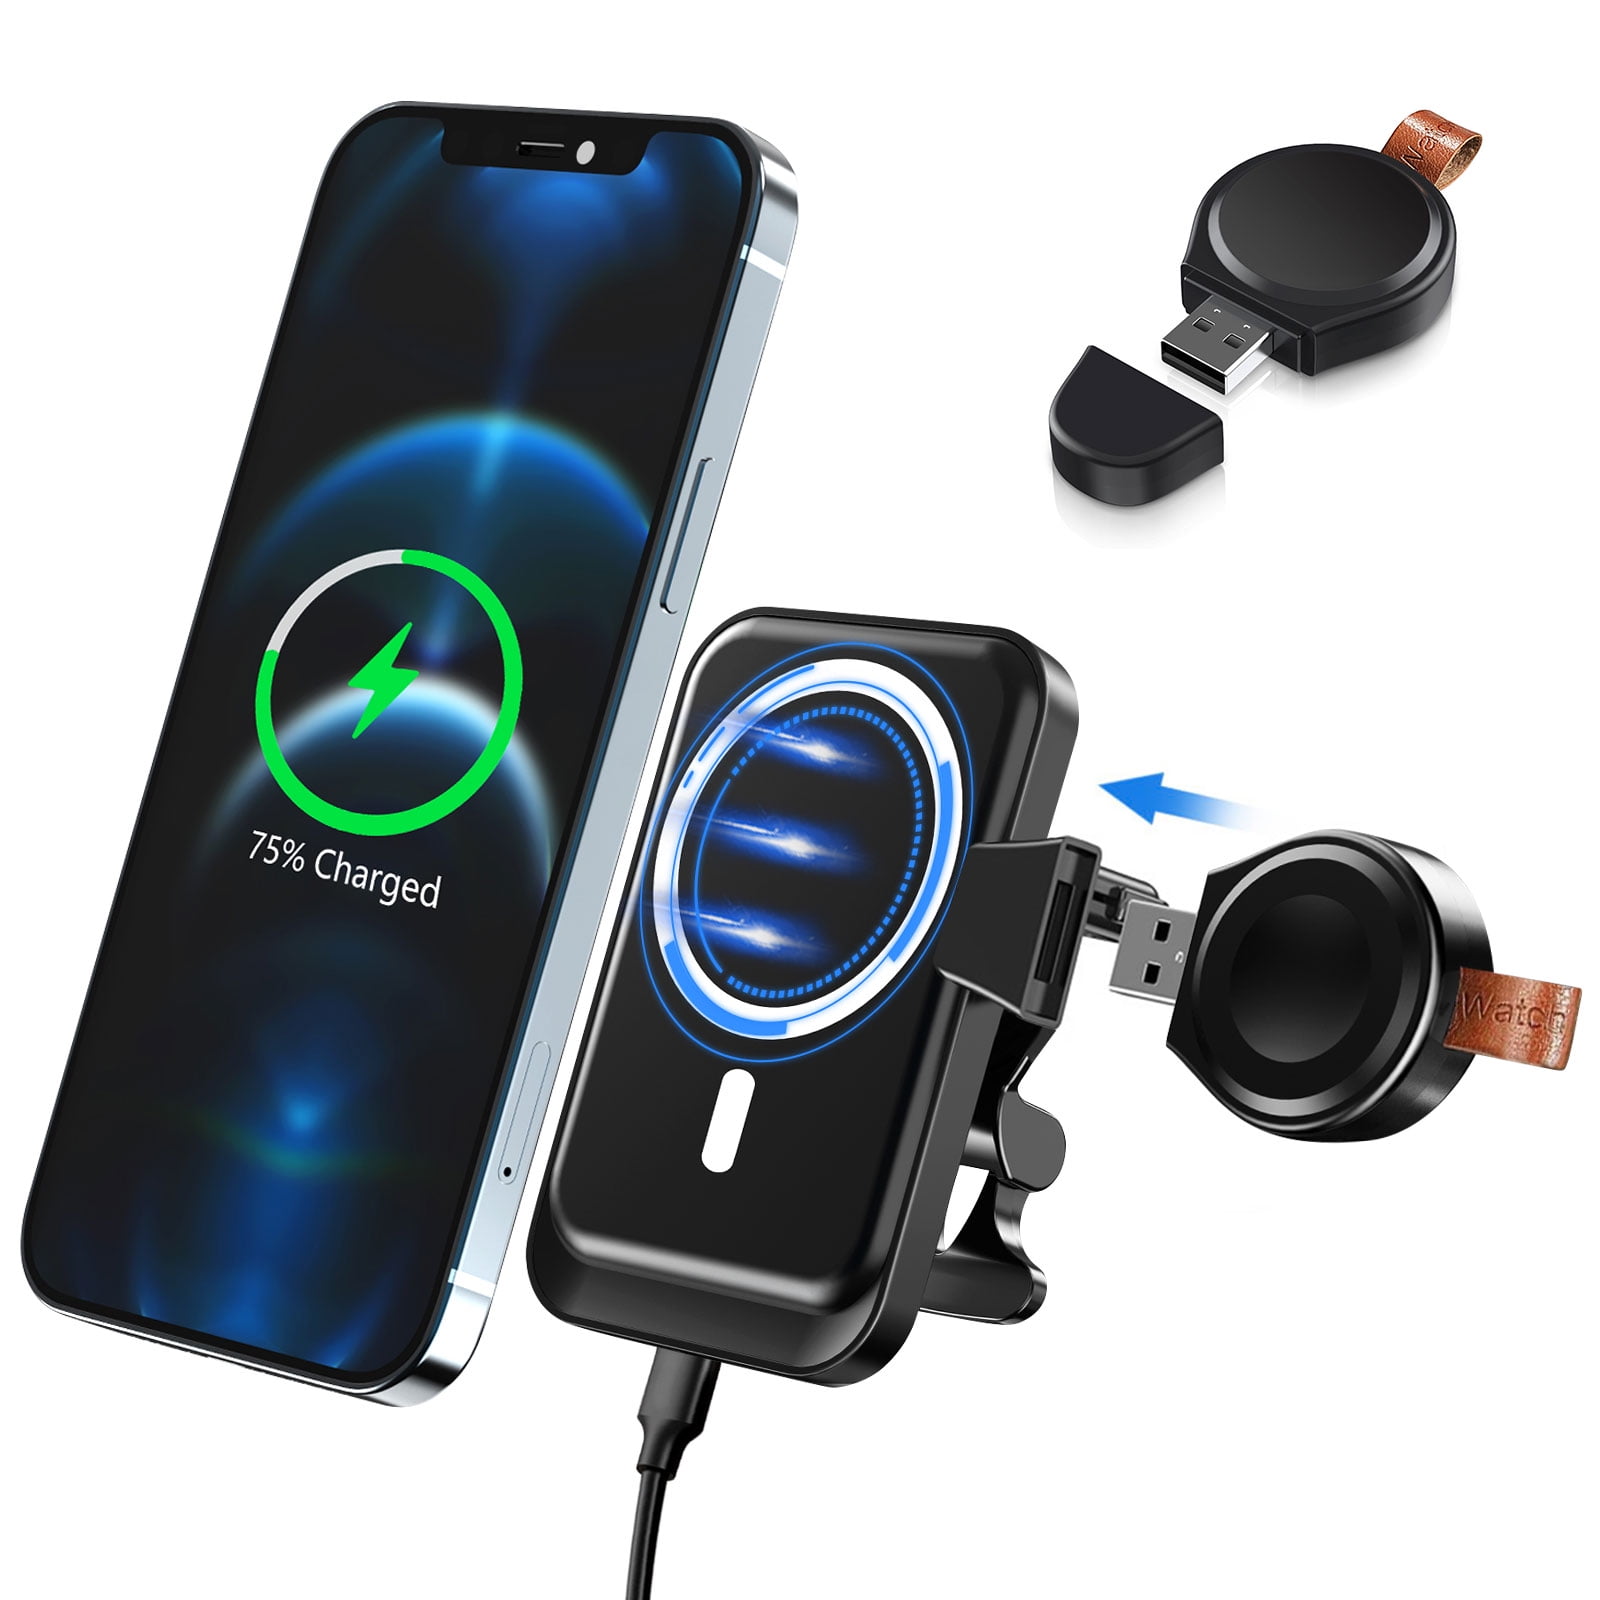 Rotate 360 Degrees Silver, Long-Clip Wireless Charging and Super Fast Charging Car Phone Holder Compatible with iPhone 12/12 Pro/11 Pro Max/8 Plus/8/X/XR/XS/SE Samsung Galaxy Note 10 Plus 